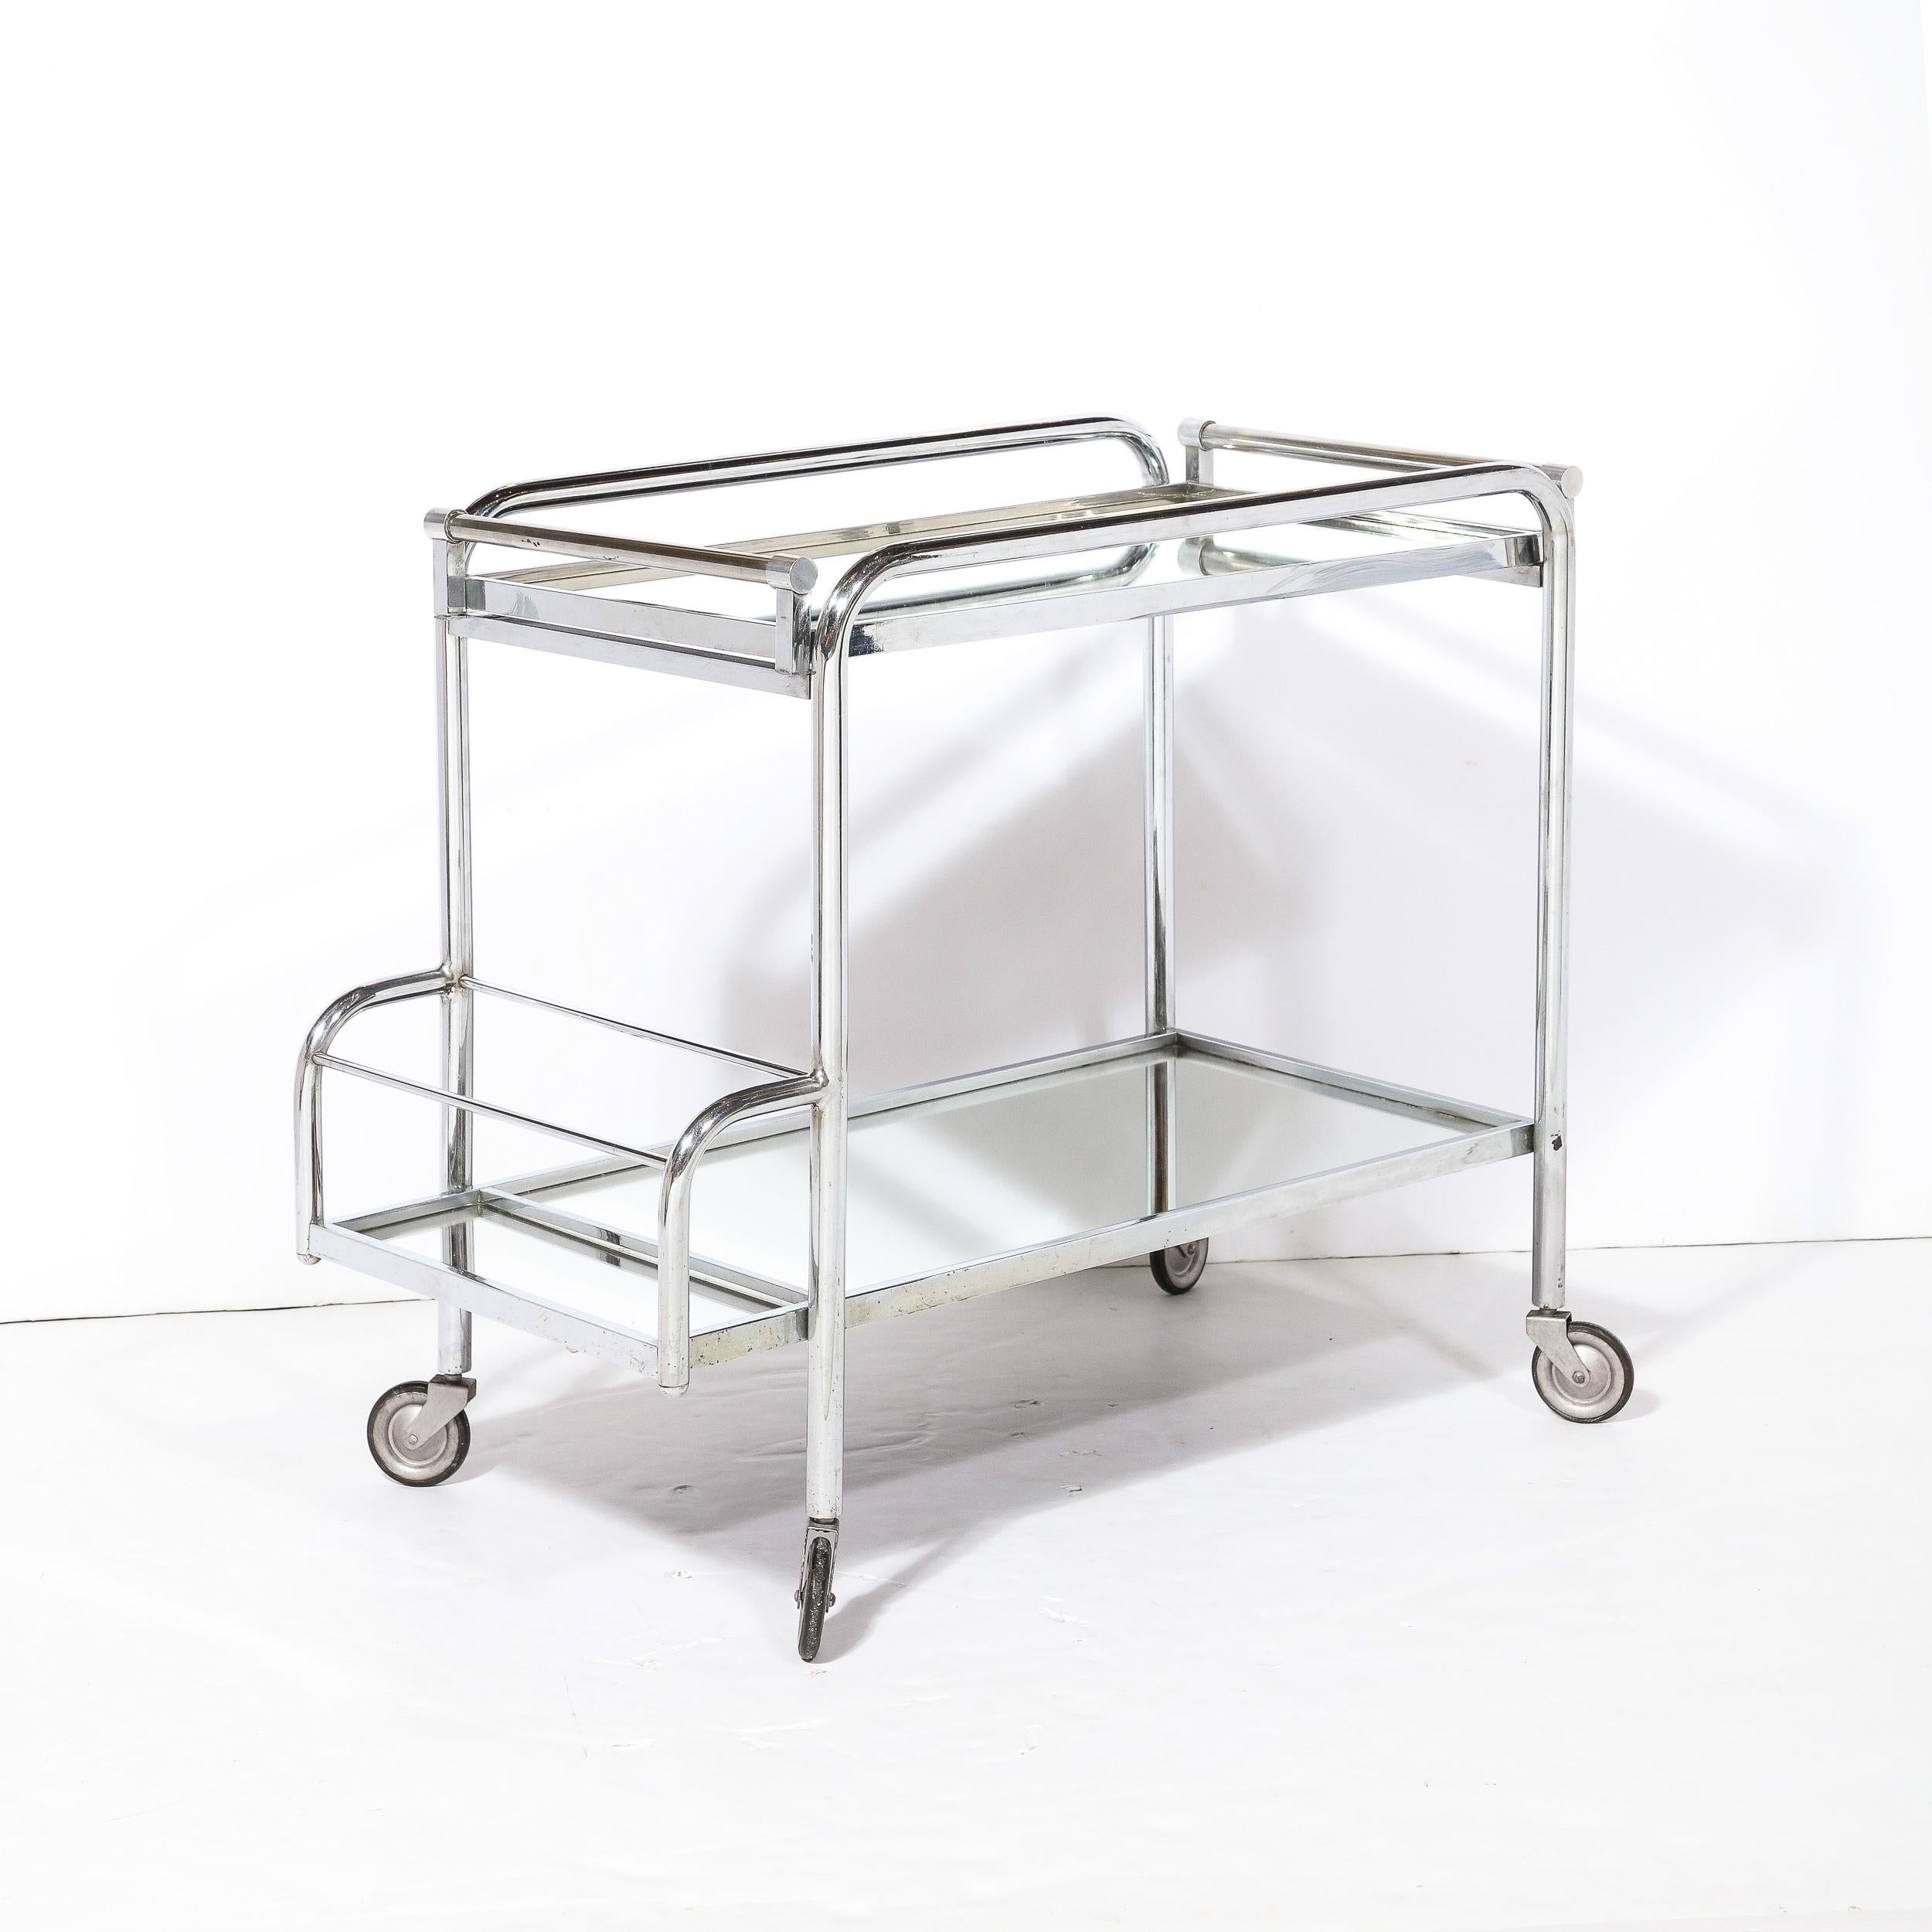 Mid-20th Century Art Deco Two-Tier Bar Cart in Polished Chrome and Mirror Glass by Jacques Adnet  For Sale